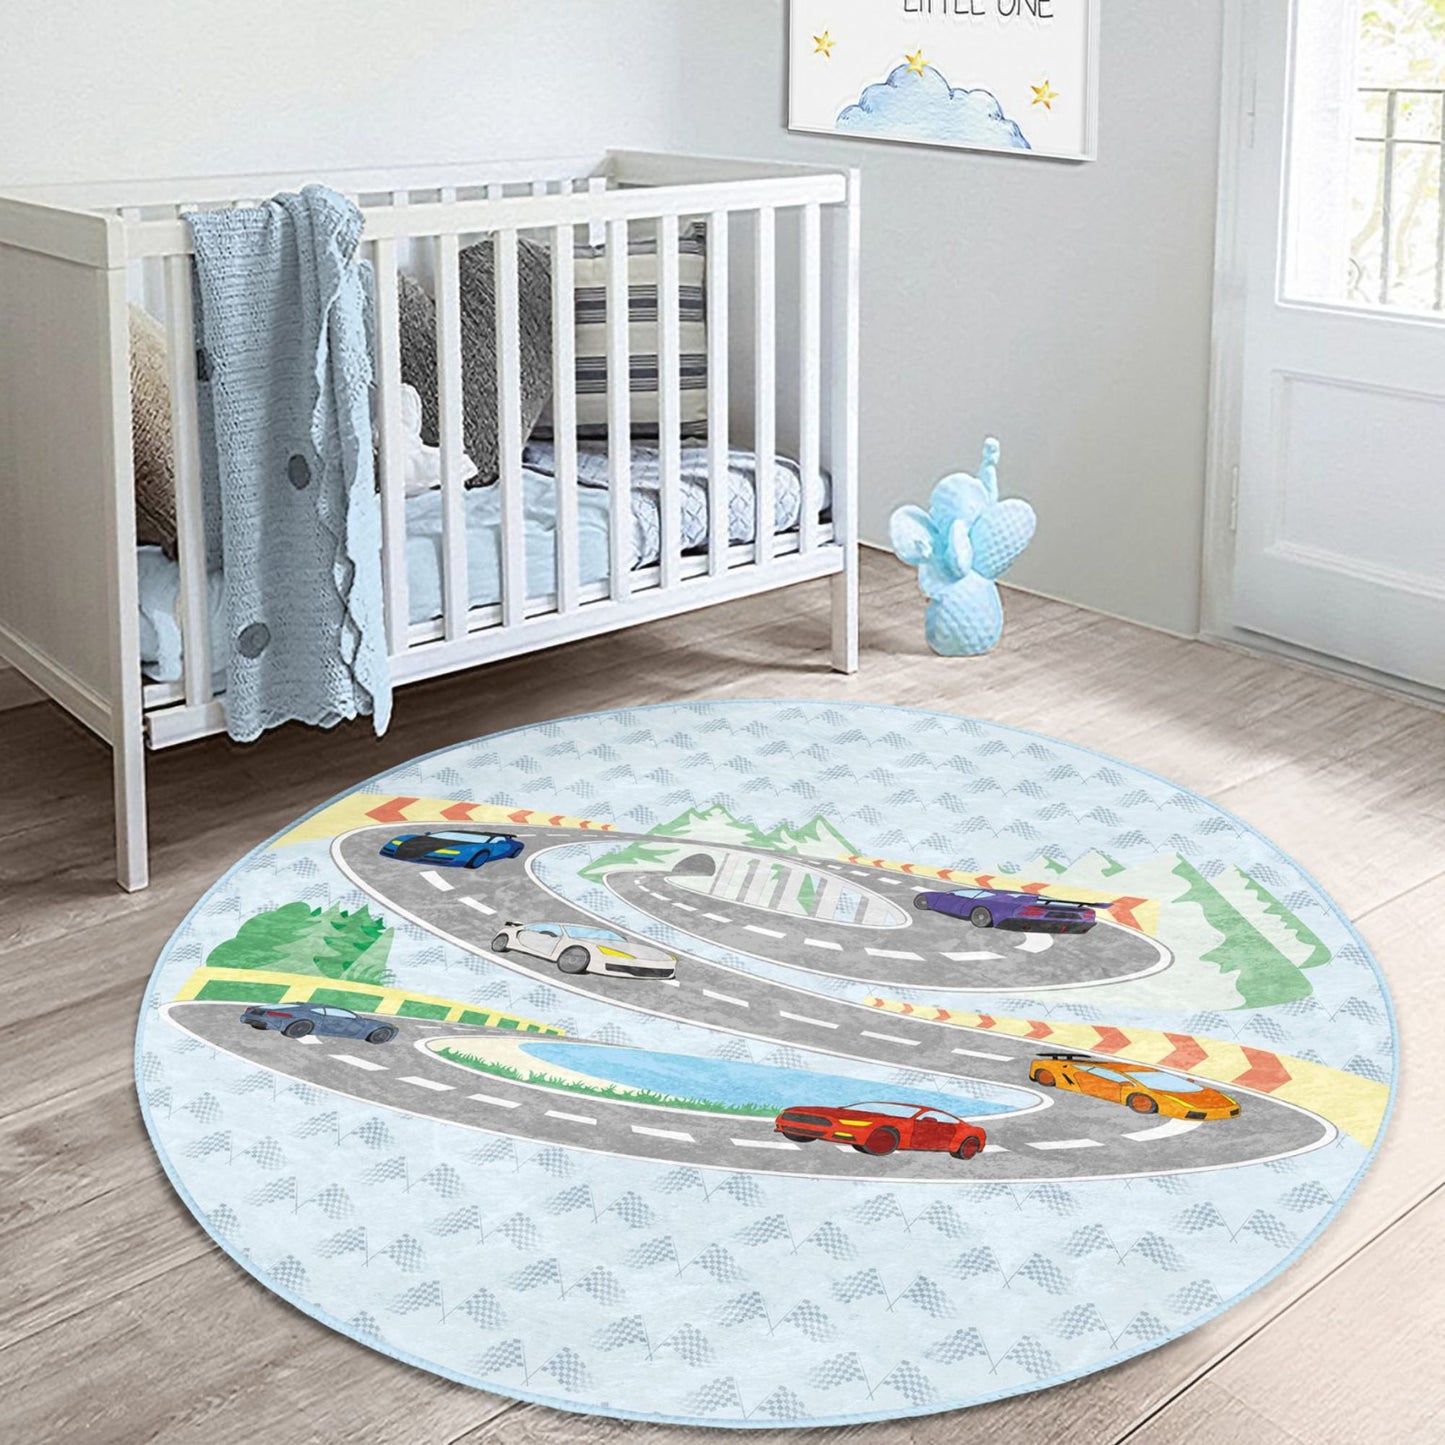 Easy-to-Clean Washable Rug for Boys' Spaces